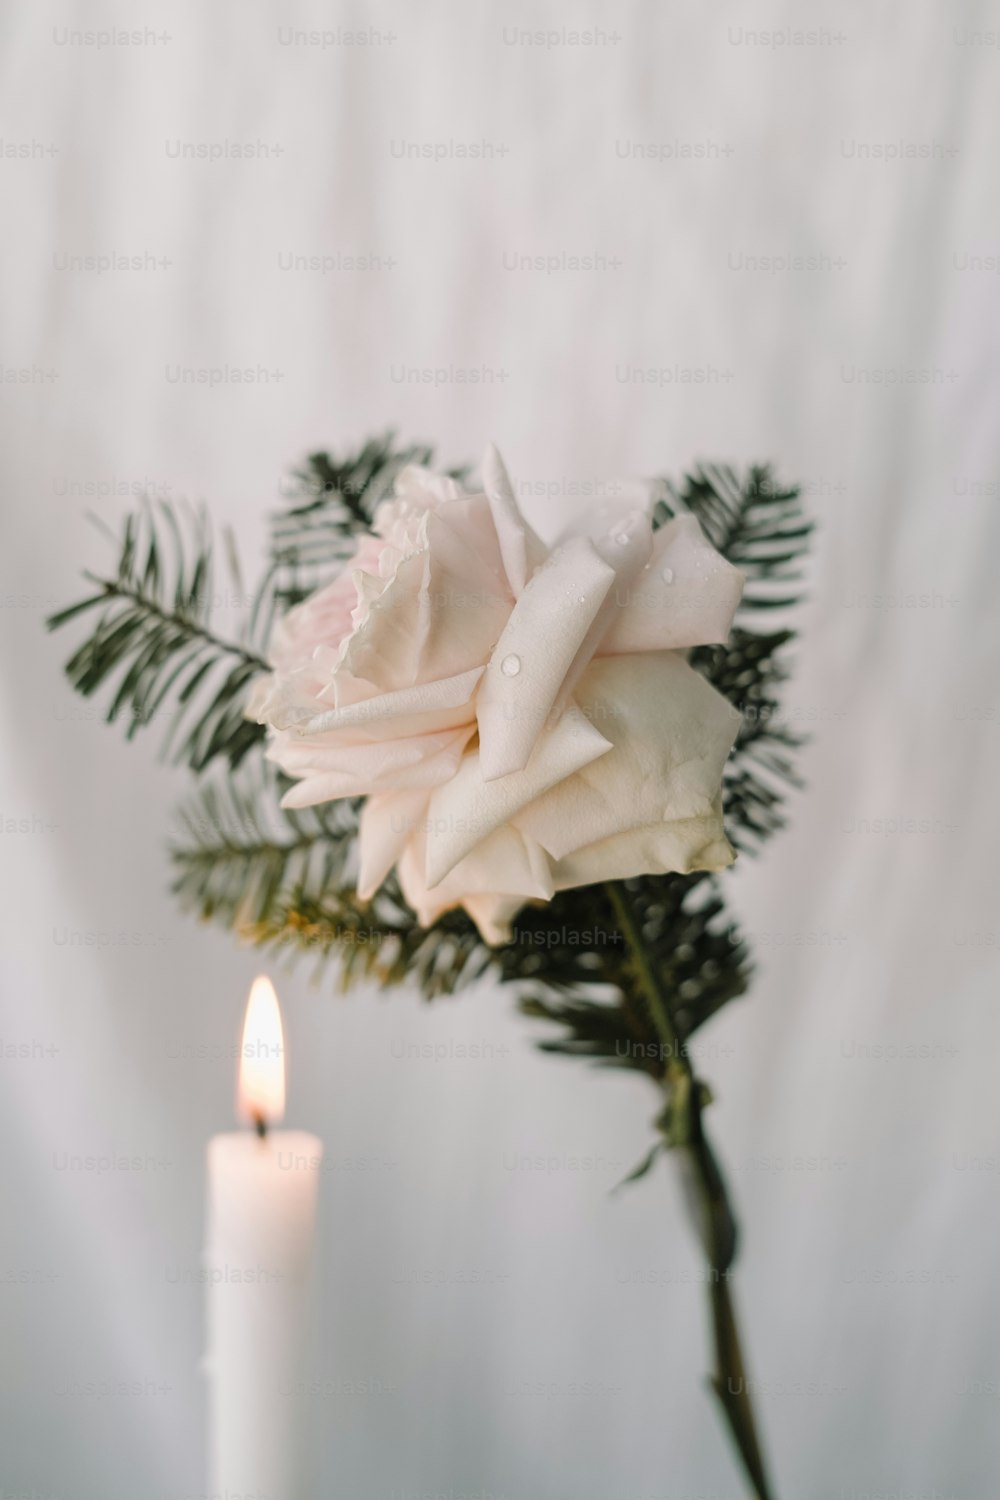 a single white rose sitting next to a lit candle